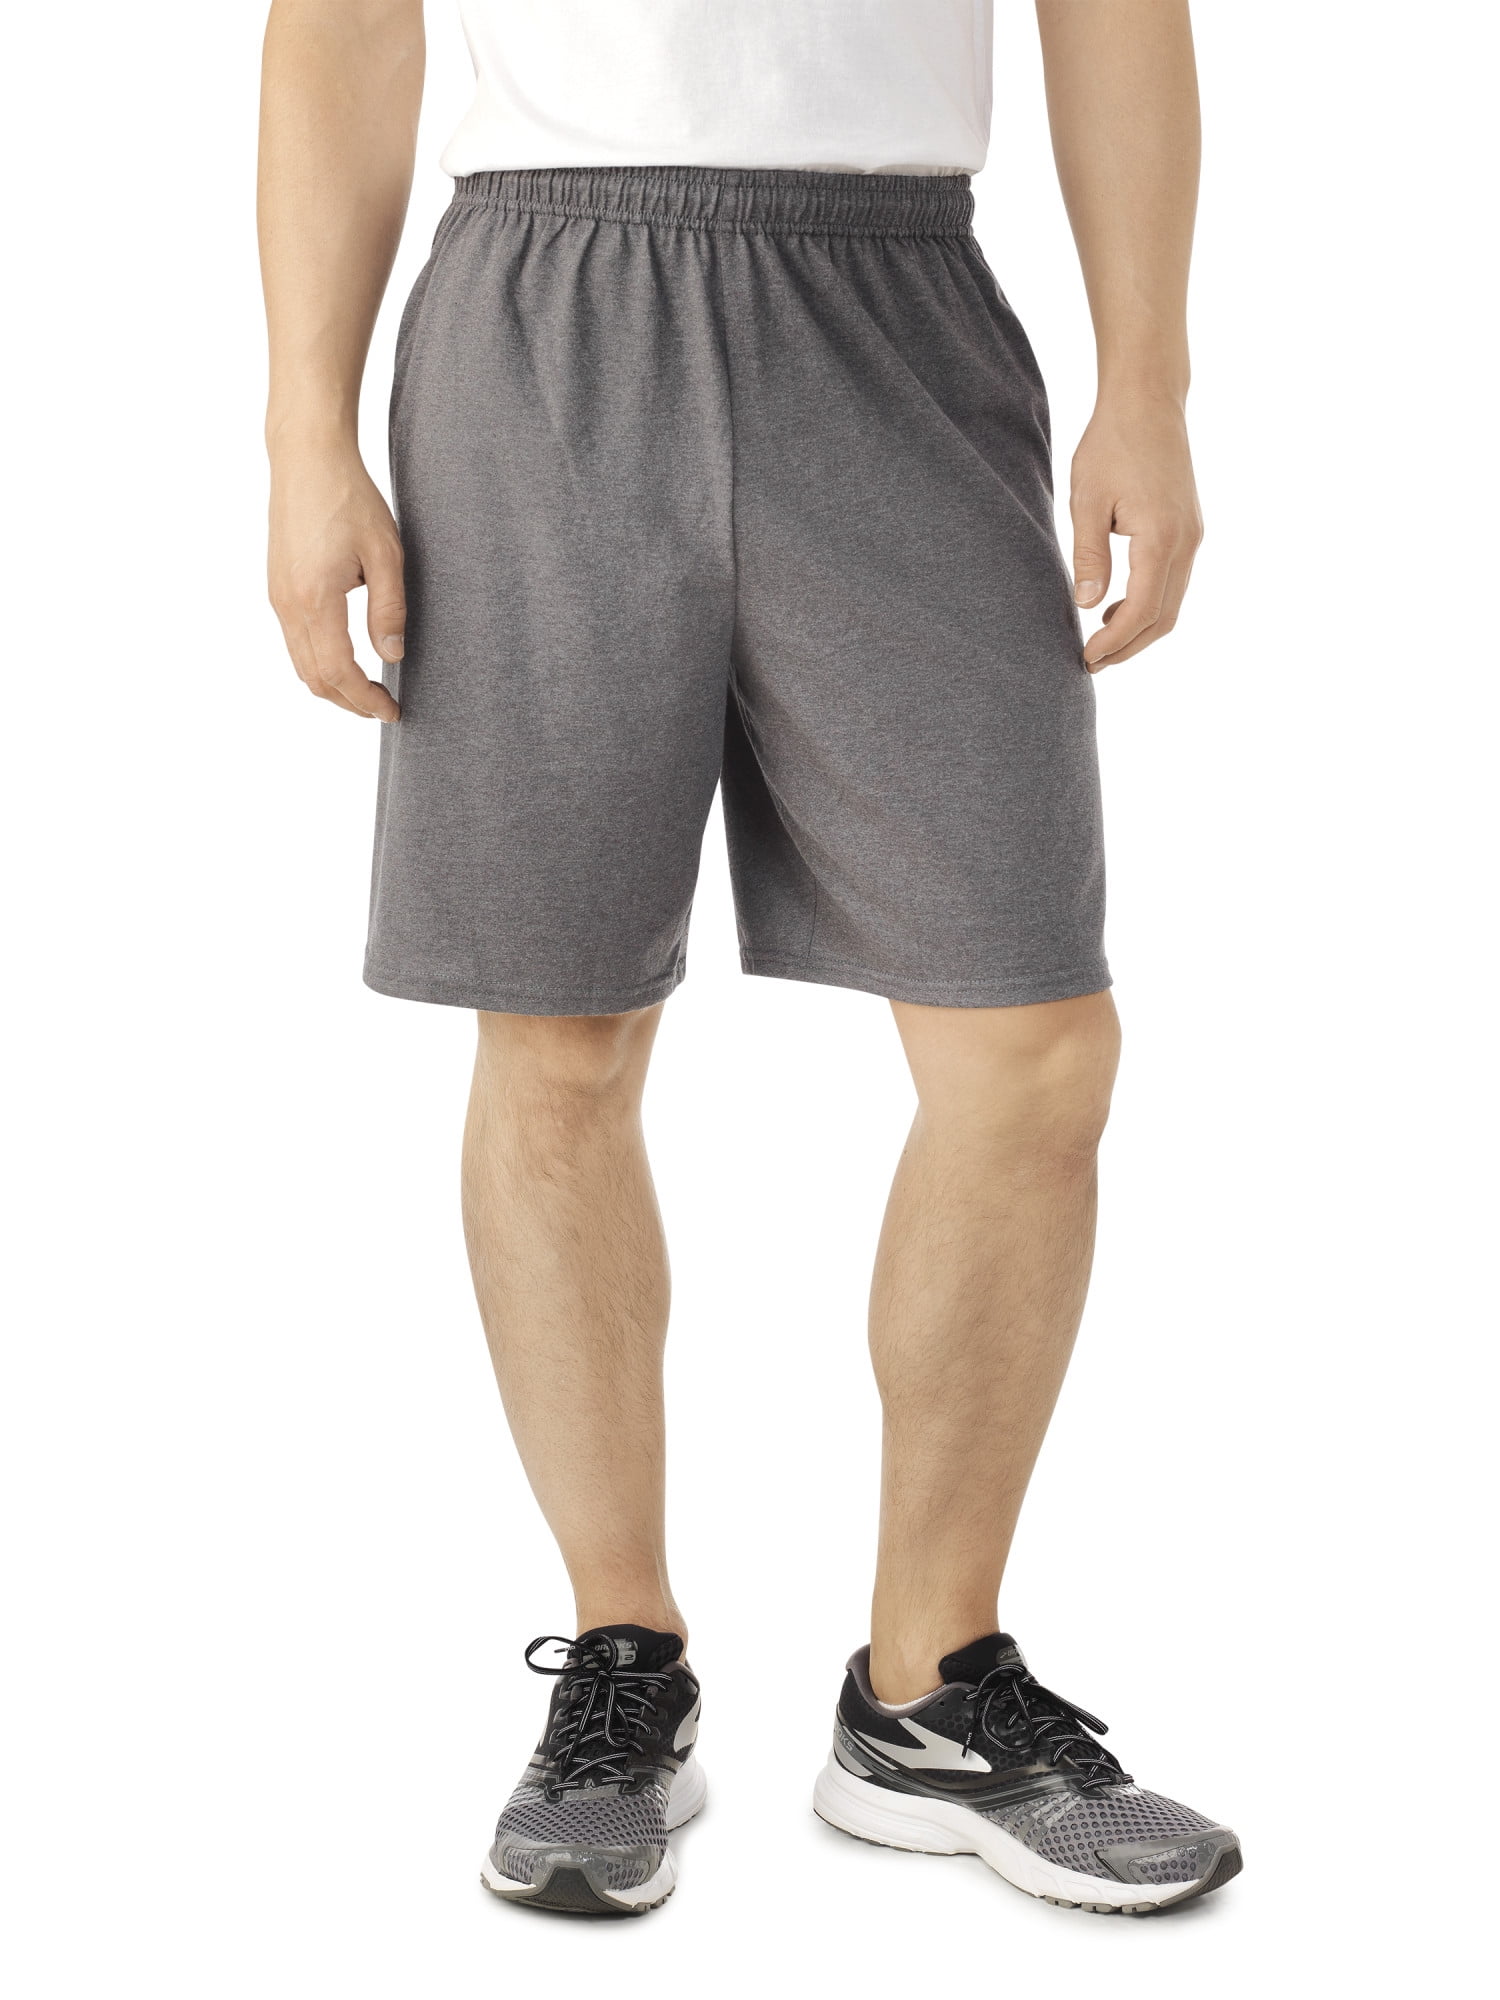 fruit of the loom men's platinum jersey shorts with side pockets